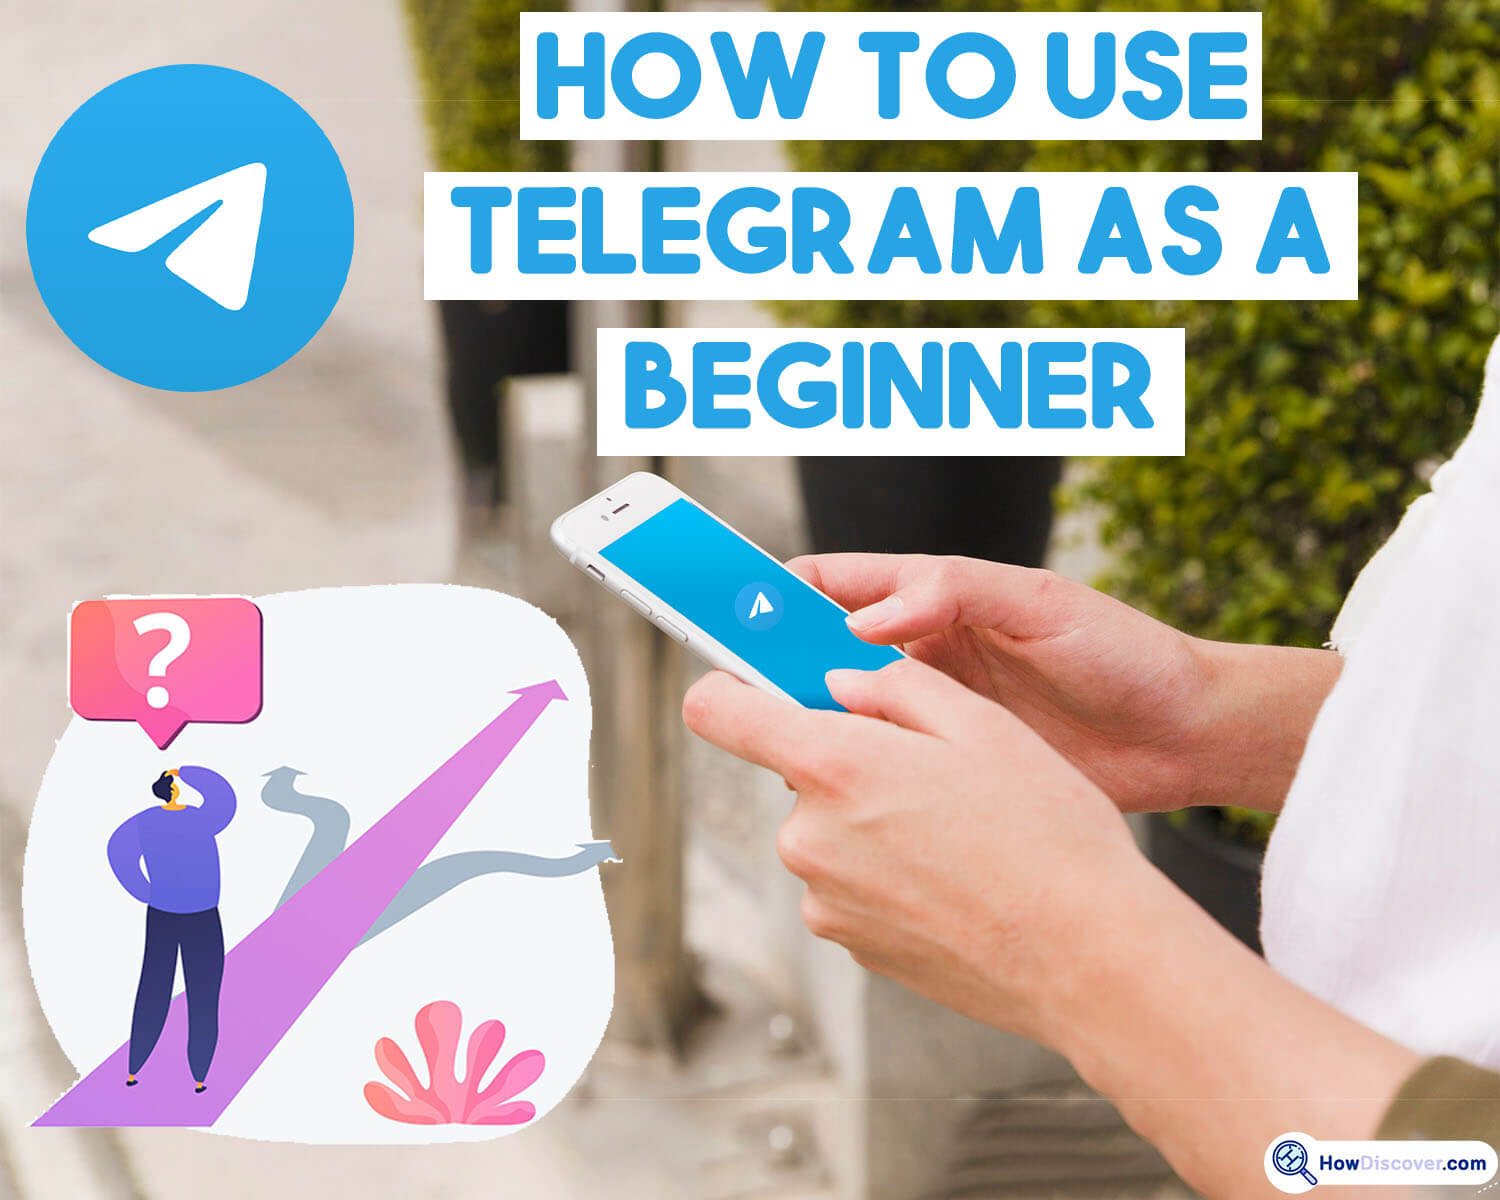 How to use Telegram as a beginner - How To Use Telegram